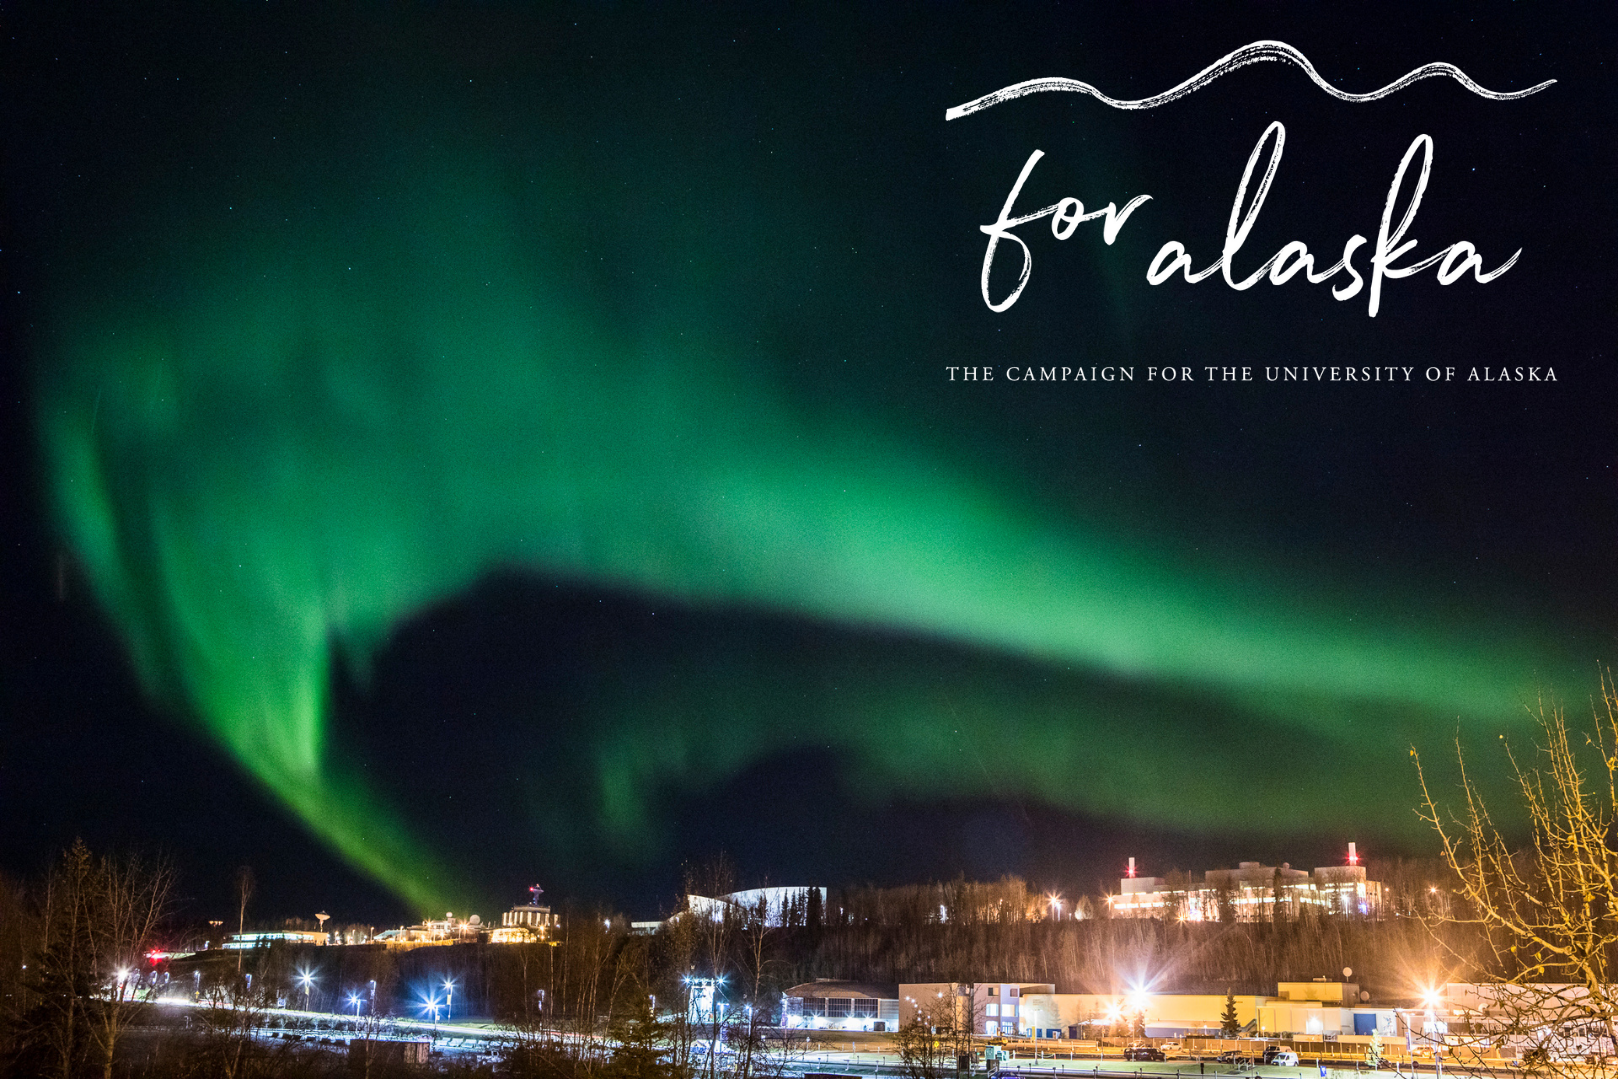 The aurora dances above the Troth Yeddha’ campus on Oct. 8, 2018. UAF photo by JR Ancheta.